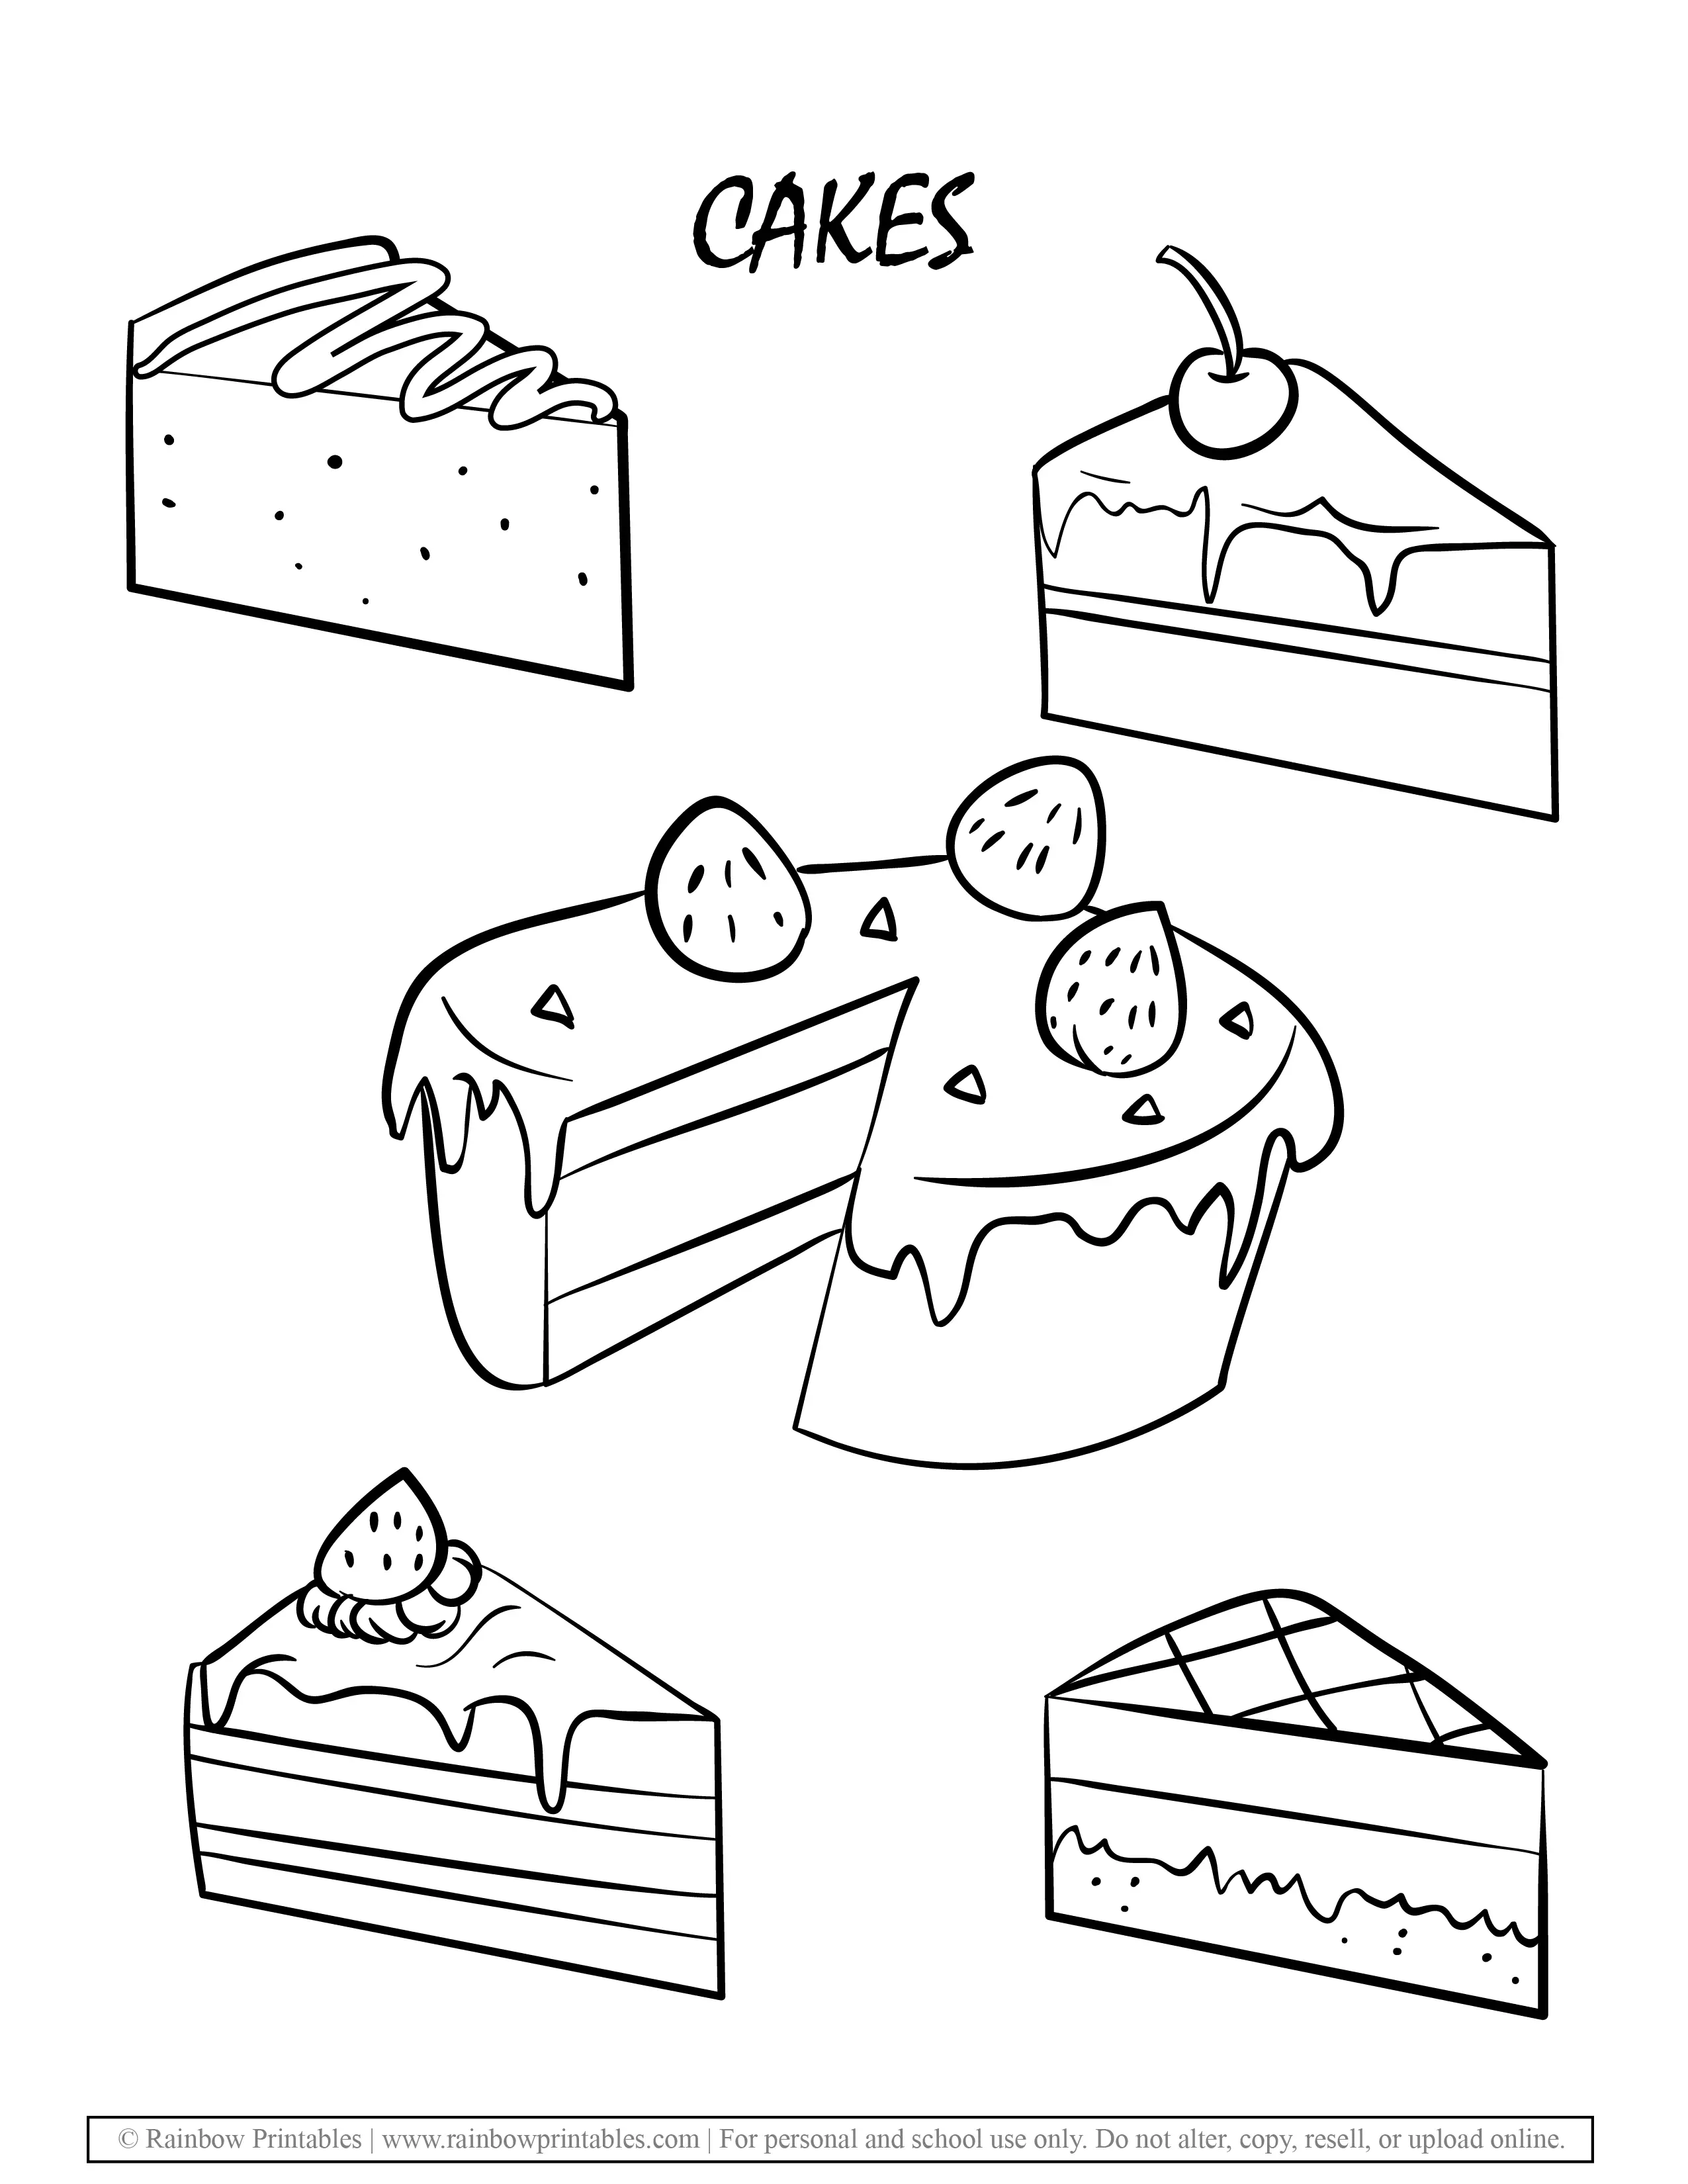 VARIOUS Chocolate Fruit Sweet CAKES Classic American Desserts Coloring Pages for Kids